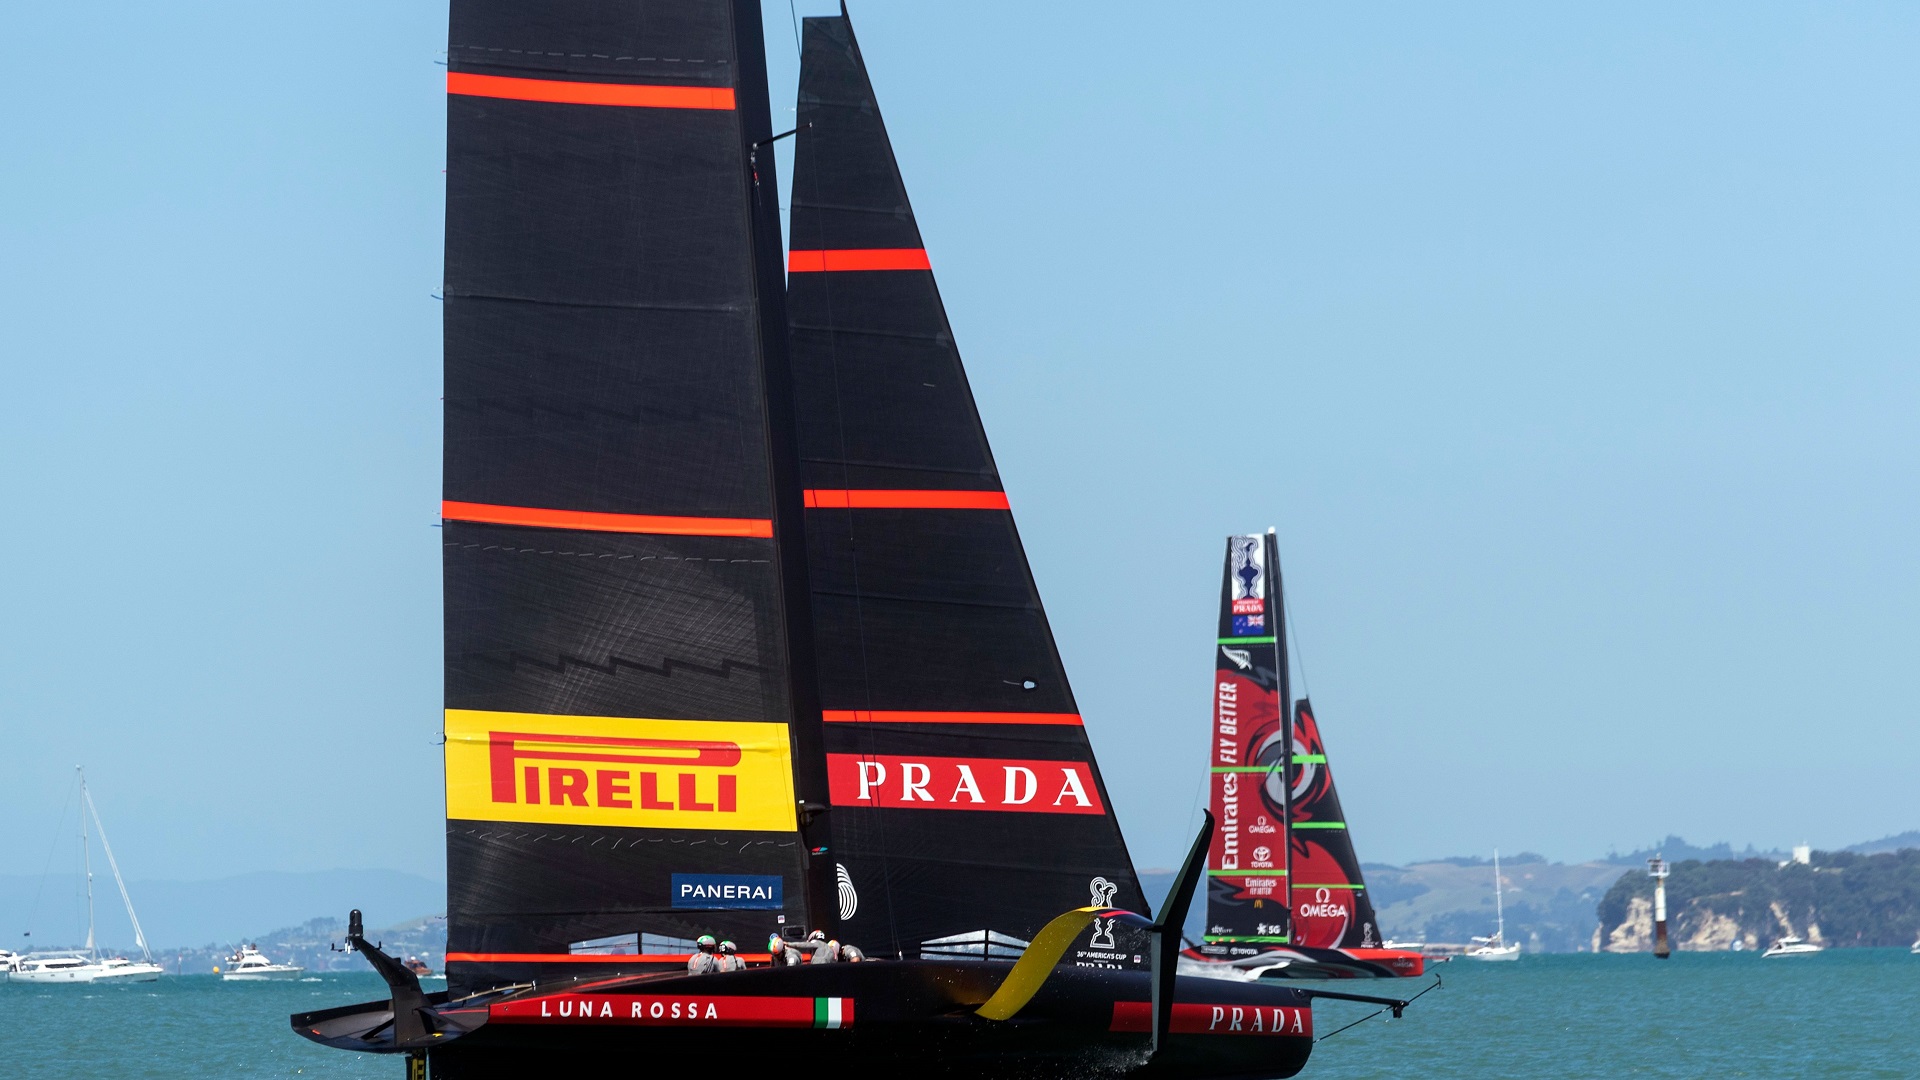 prada-cup-2021-finale-scommesse-sportive-giocate-online-Betaland-TheClover2